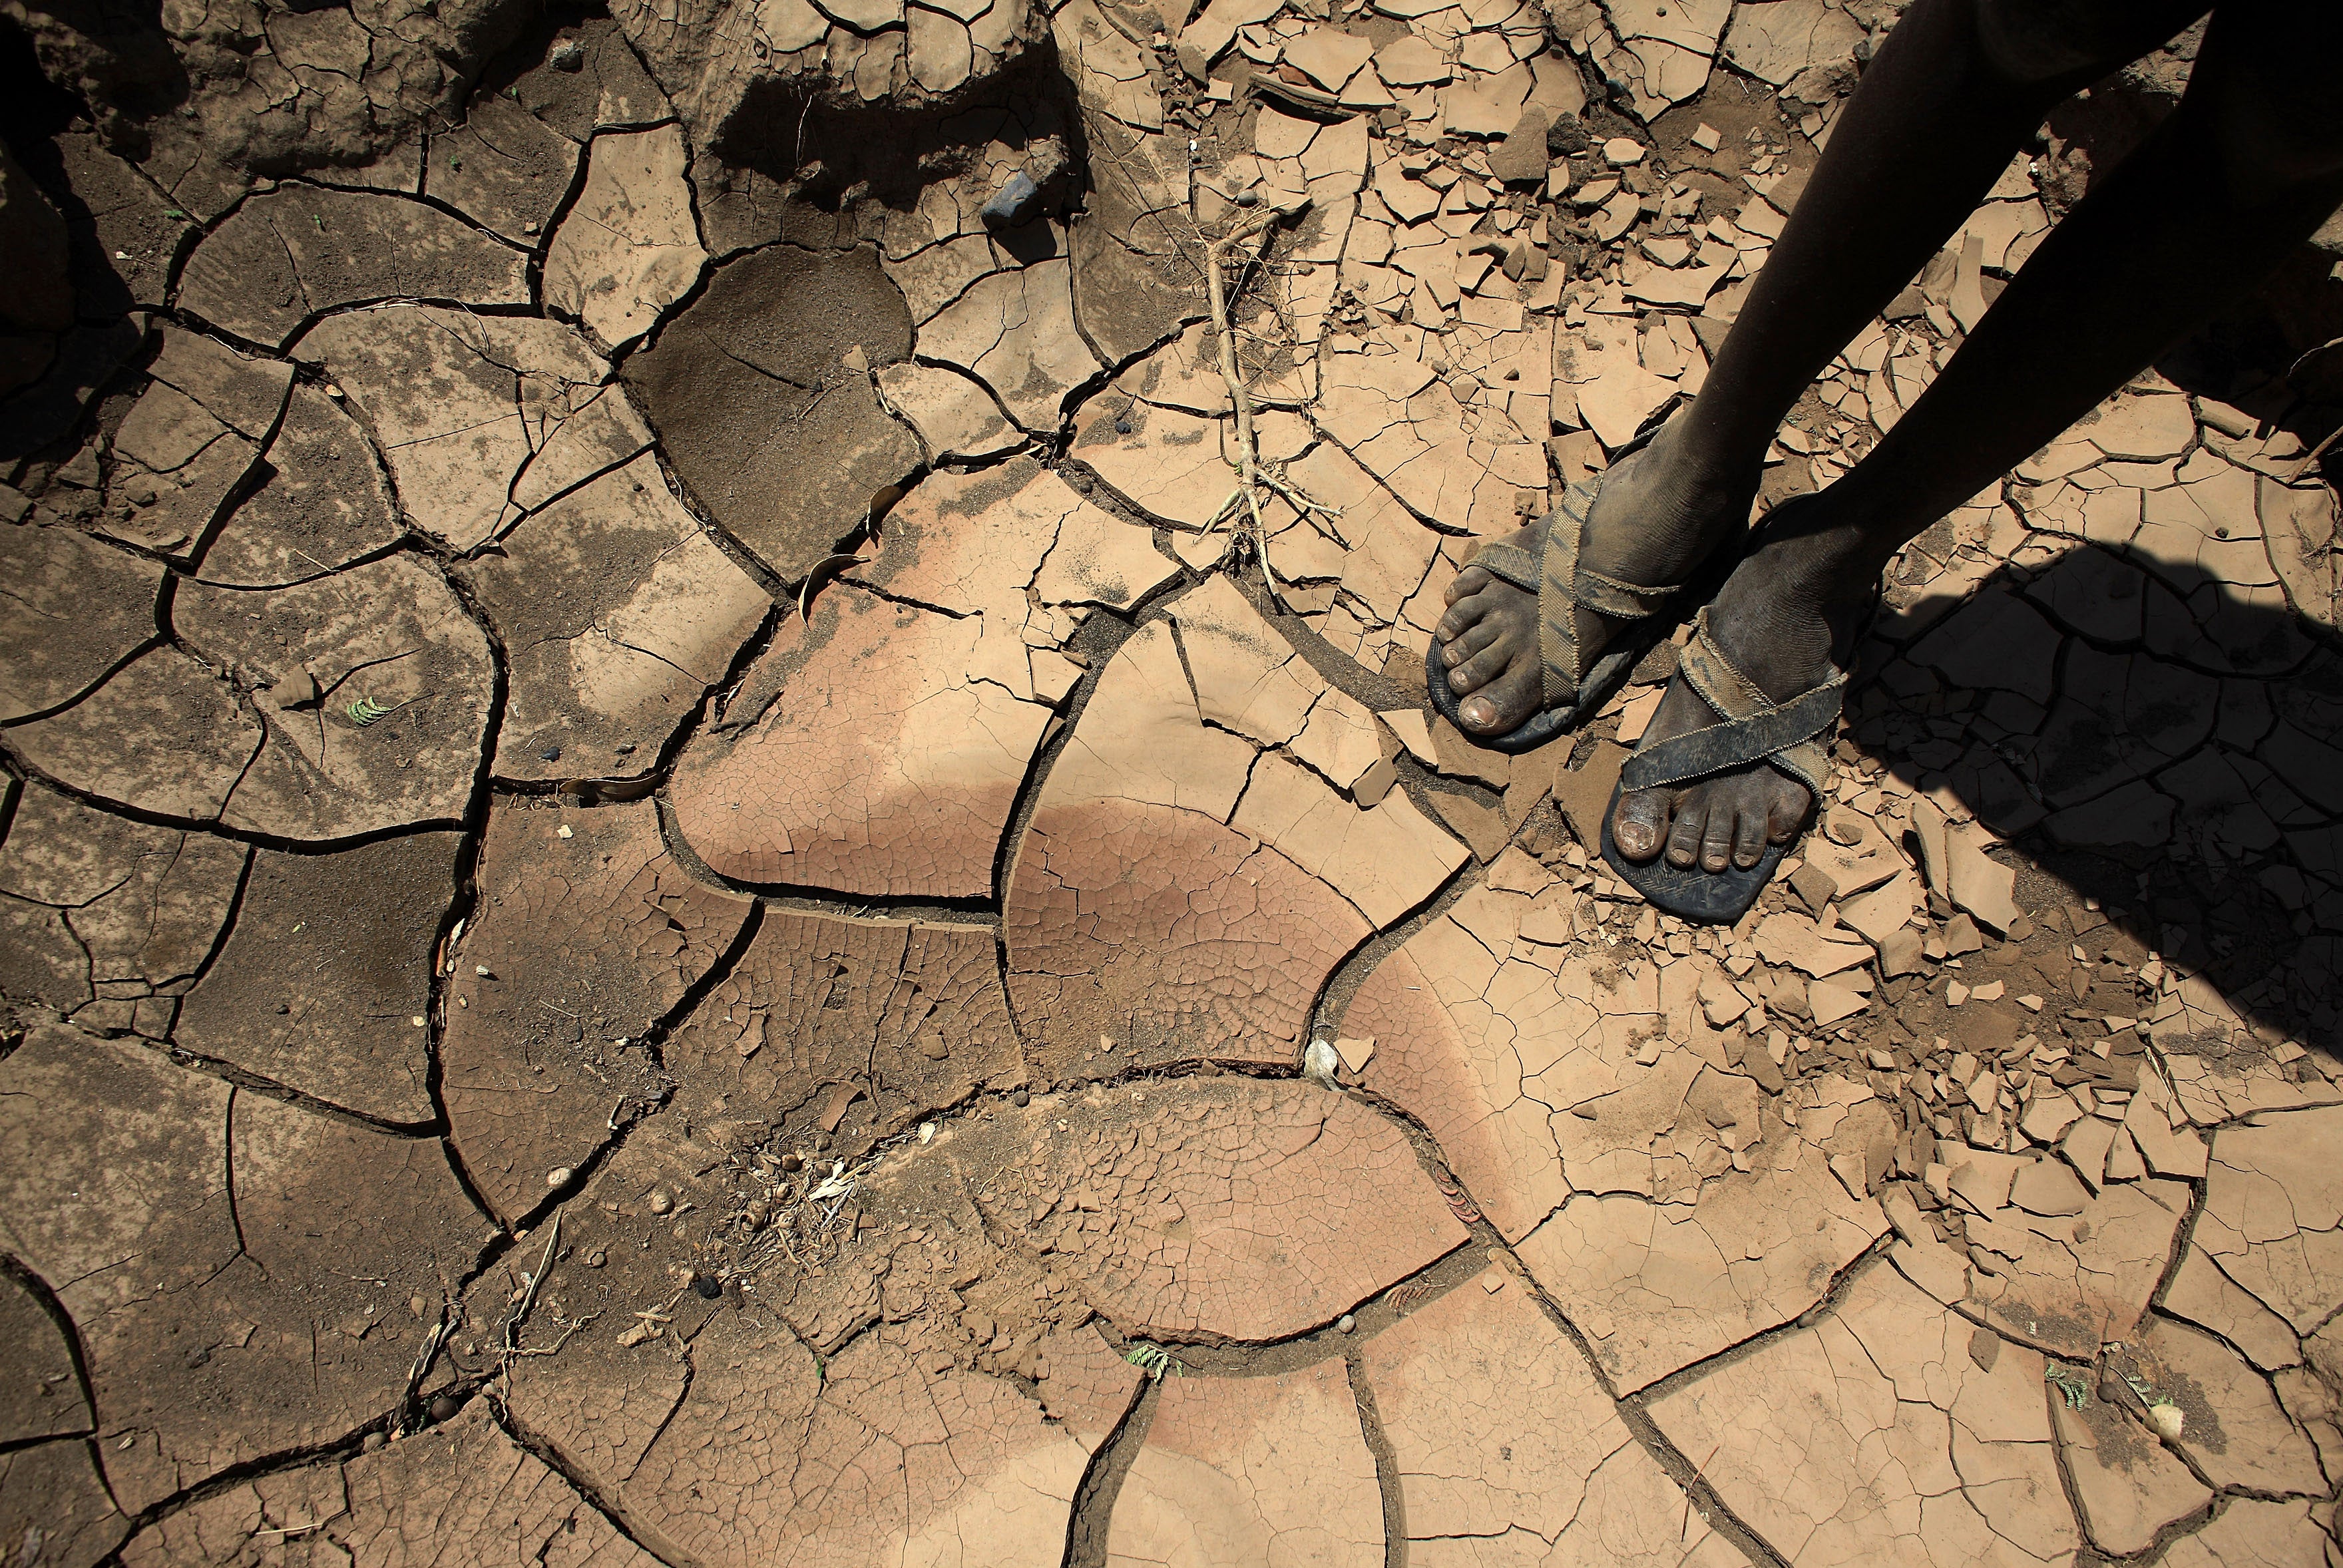 A boy from a remote tribe stands on a dried-up river bed in Kenya made worse by climate change